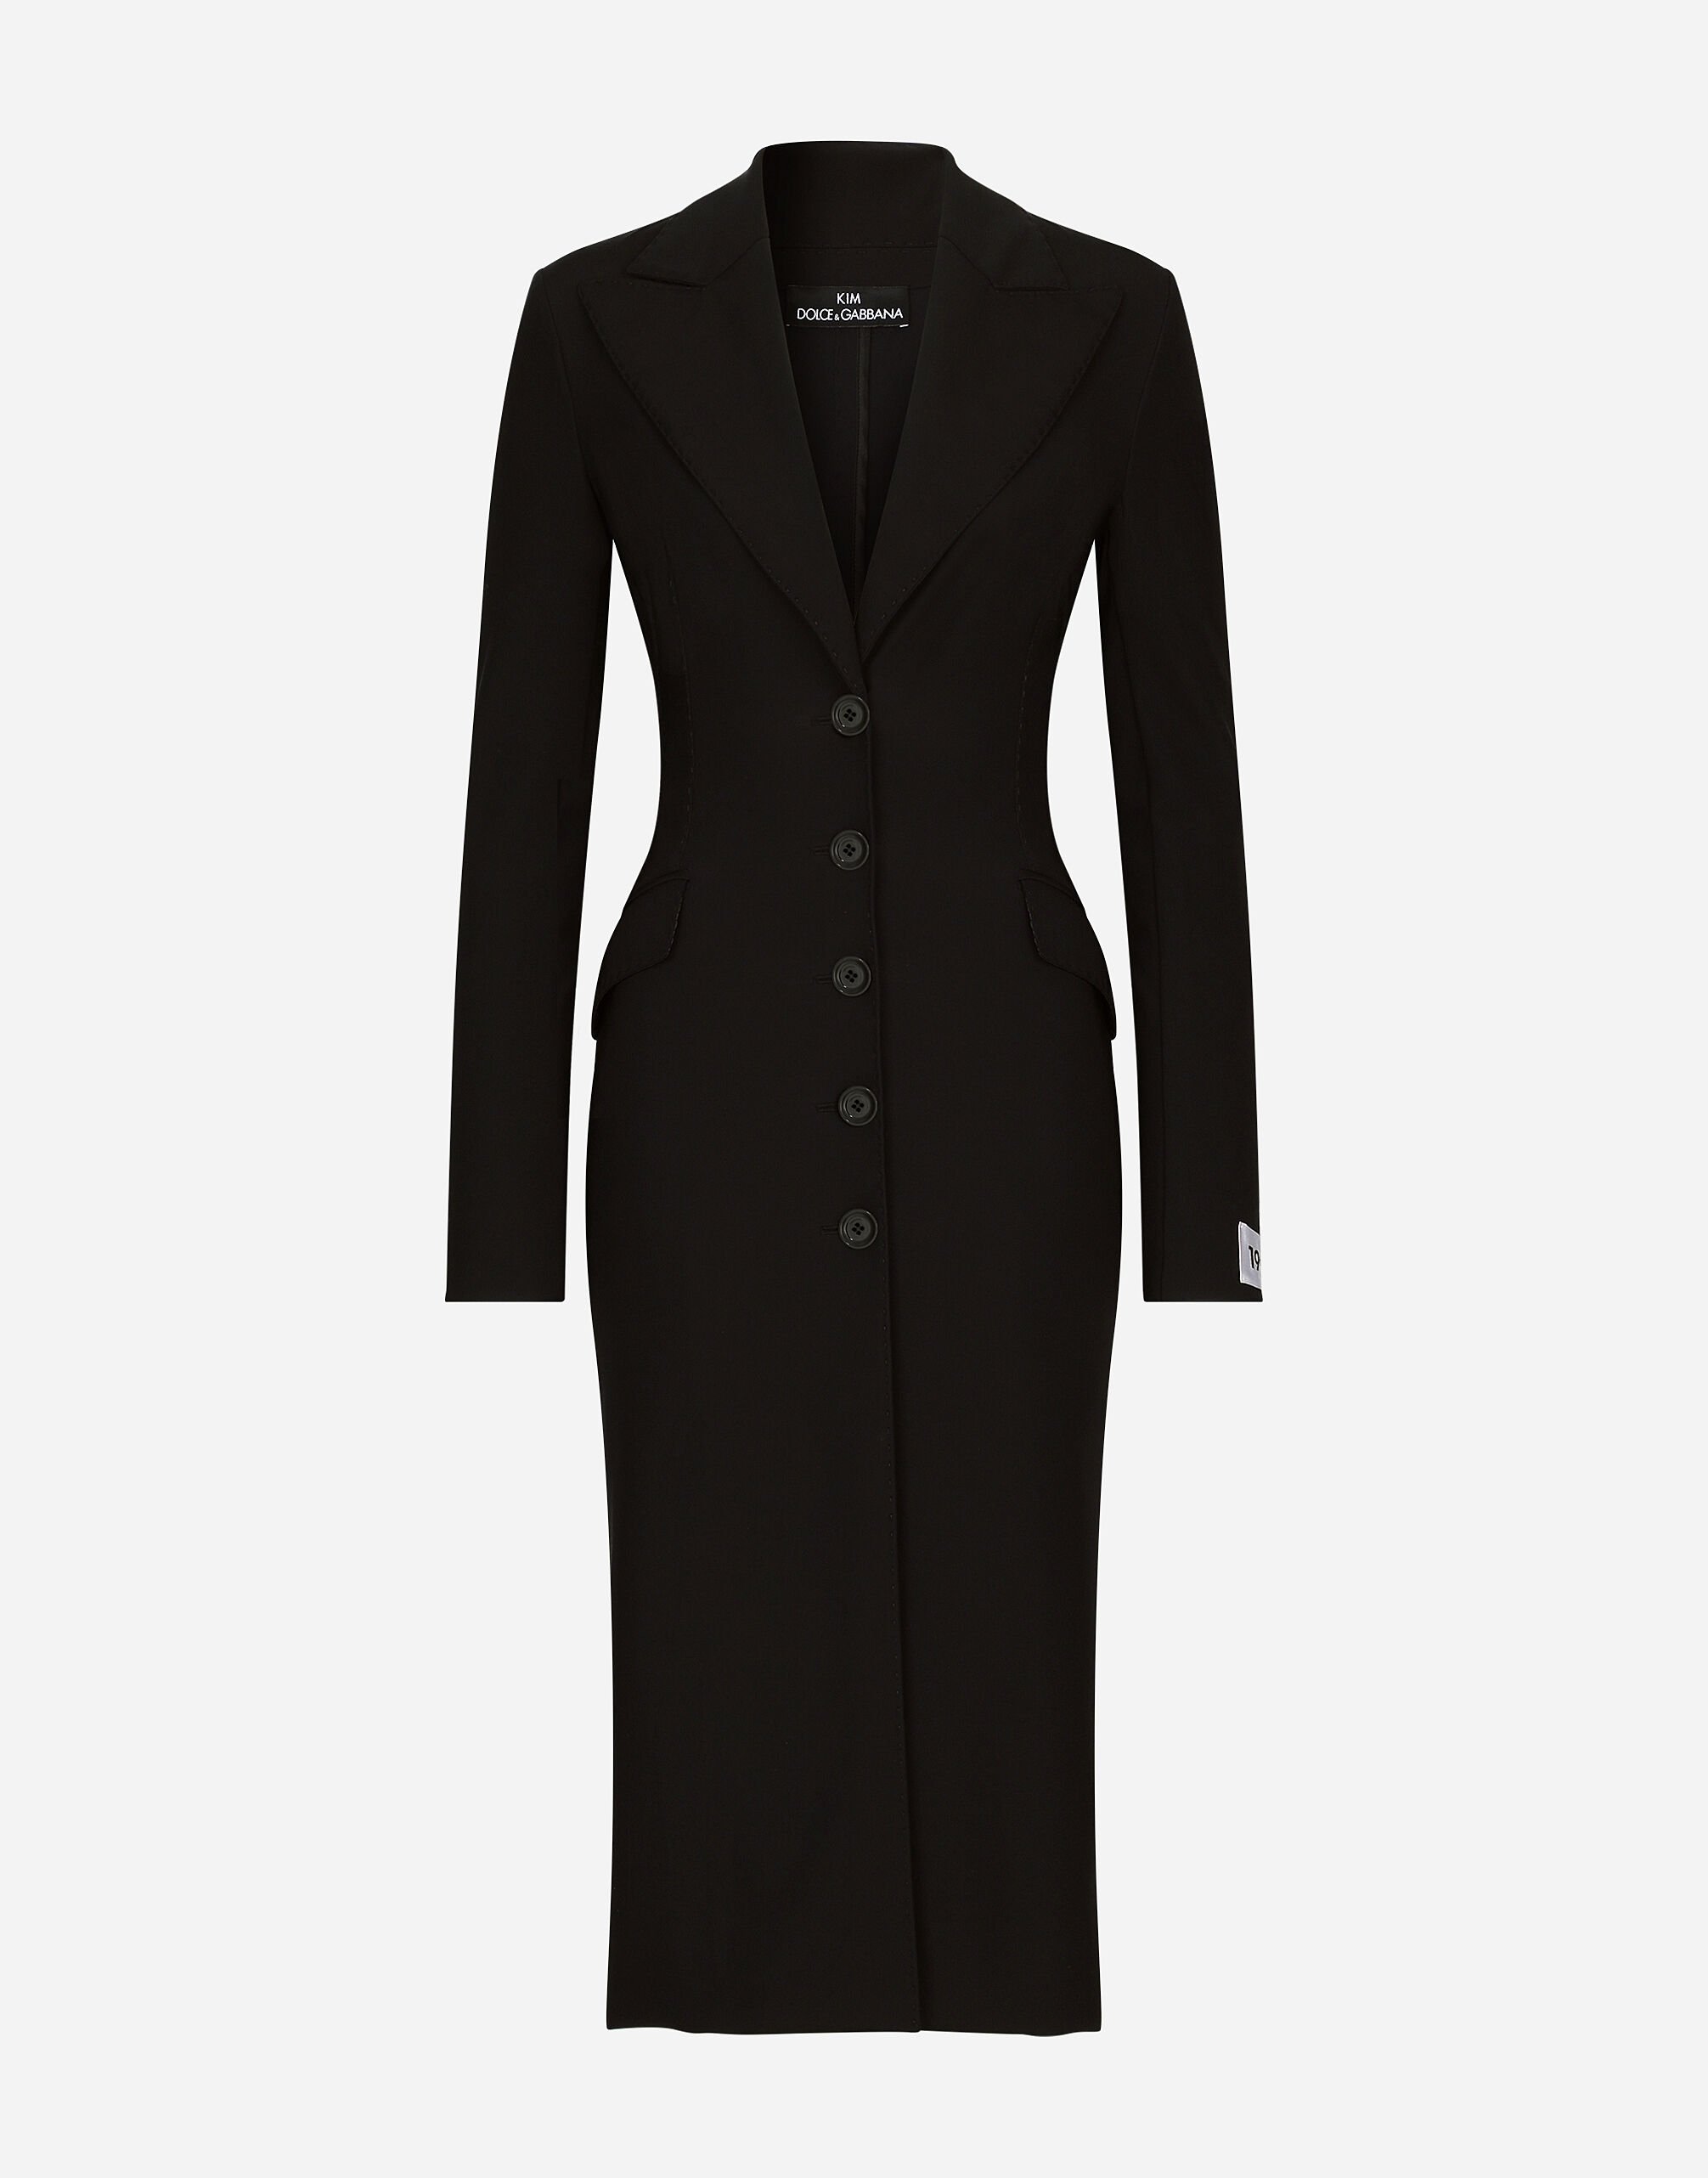 ${brand} KIM DOLCE&GABBANA Jersey coat dress with the Re-Edition label ${colorDescription} ${masterID}